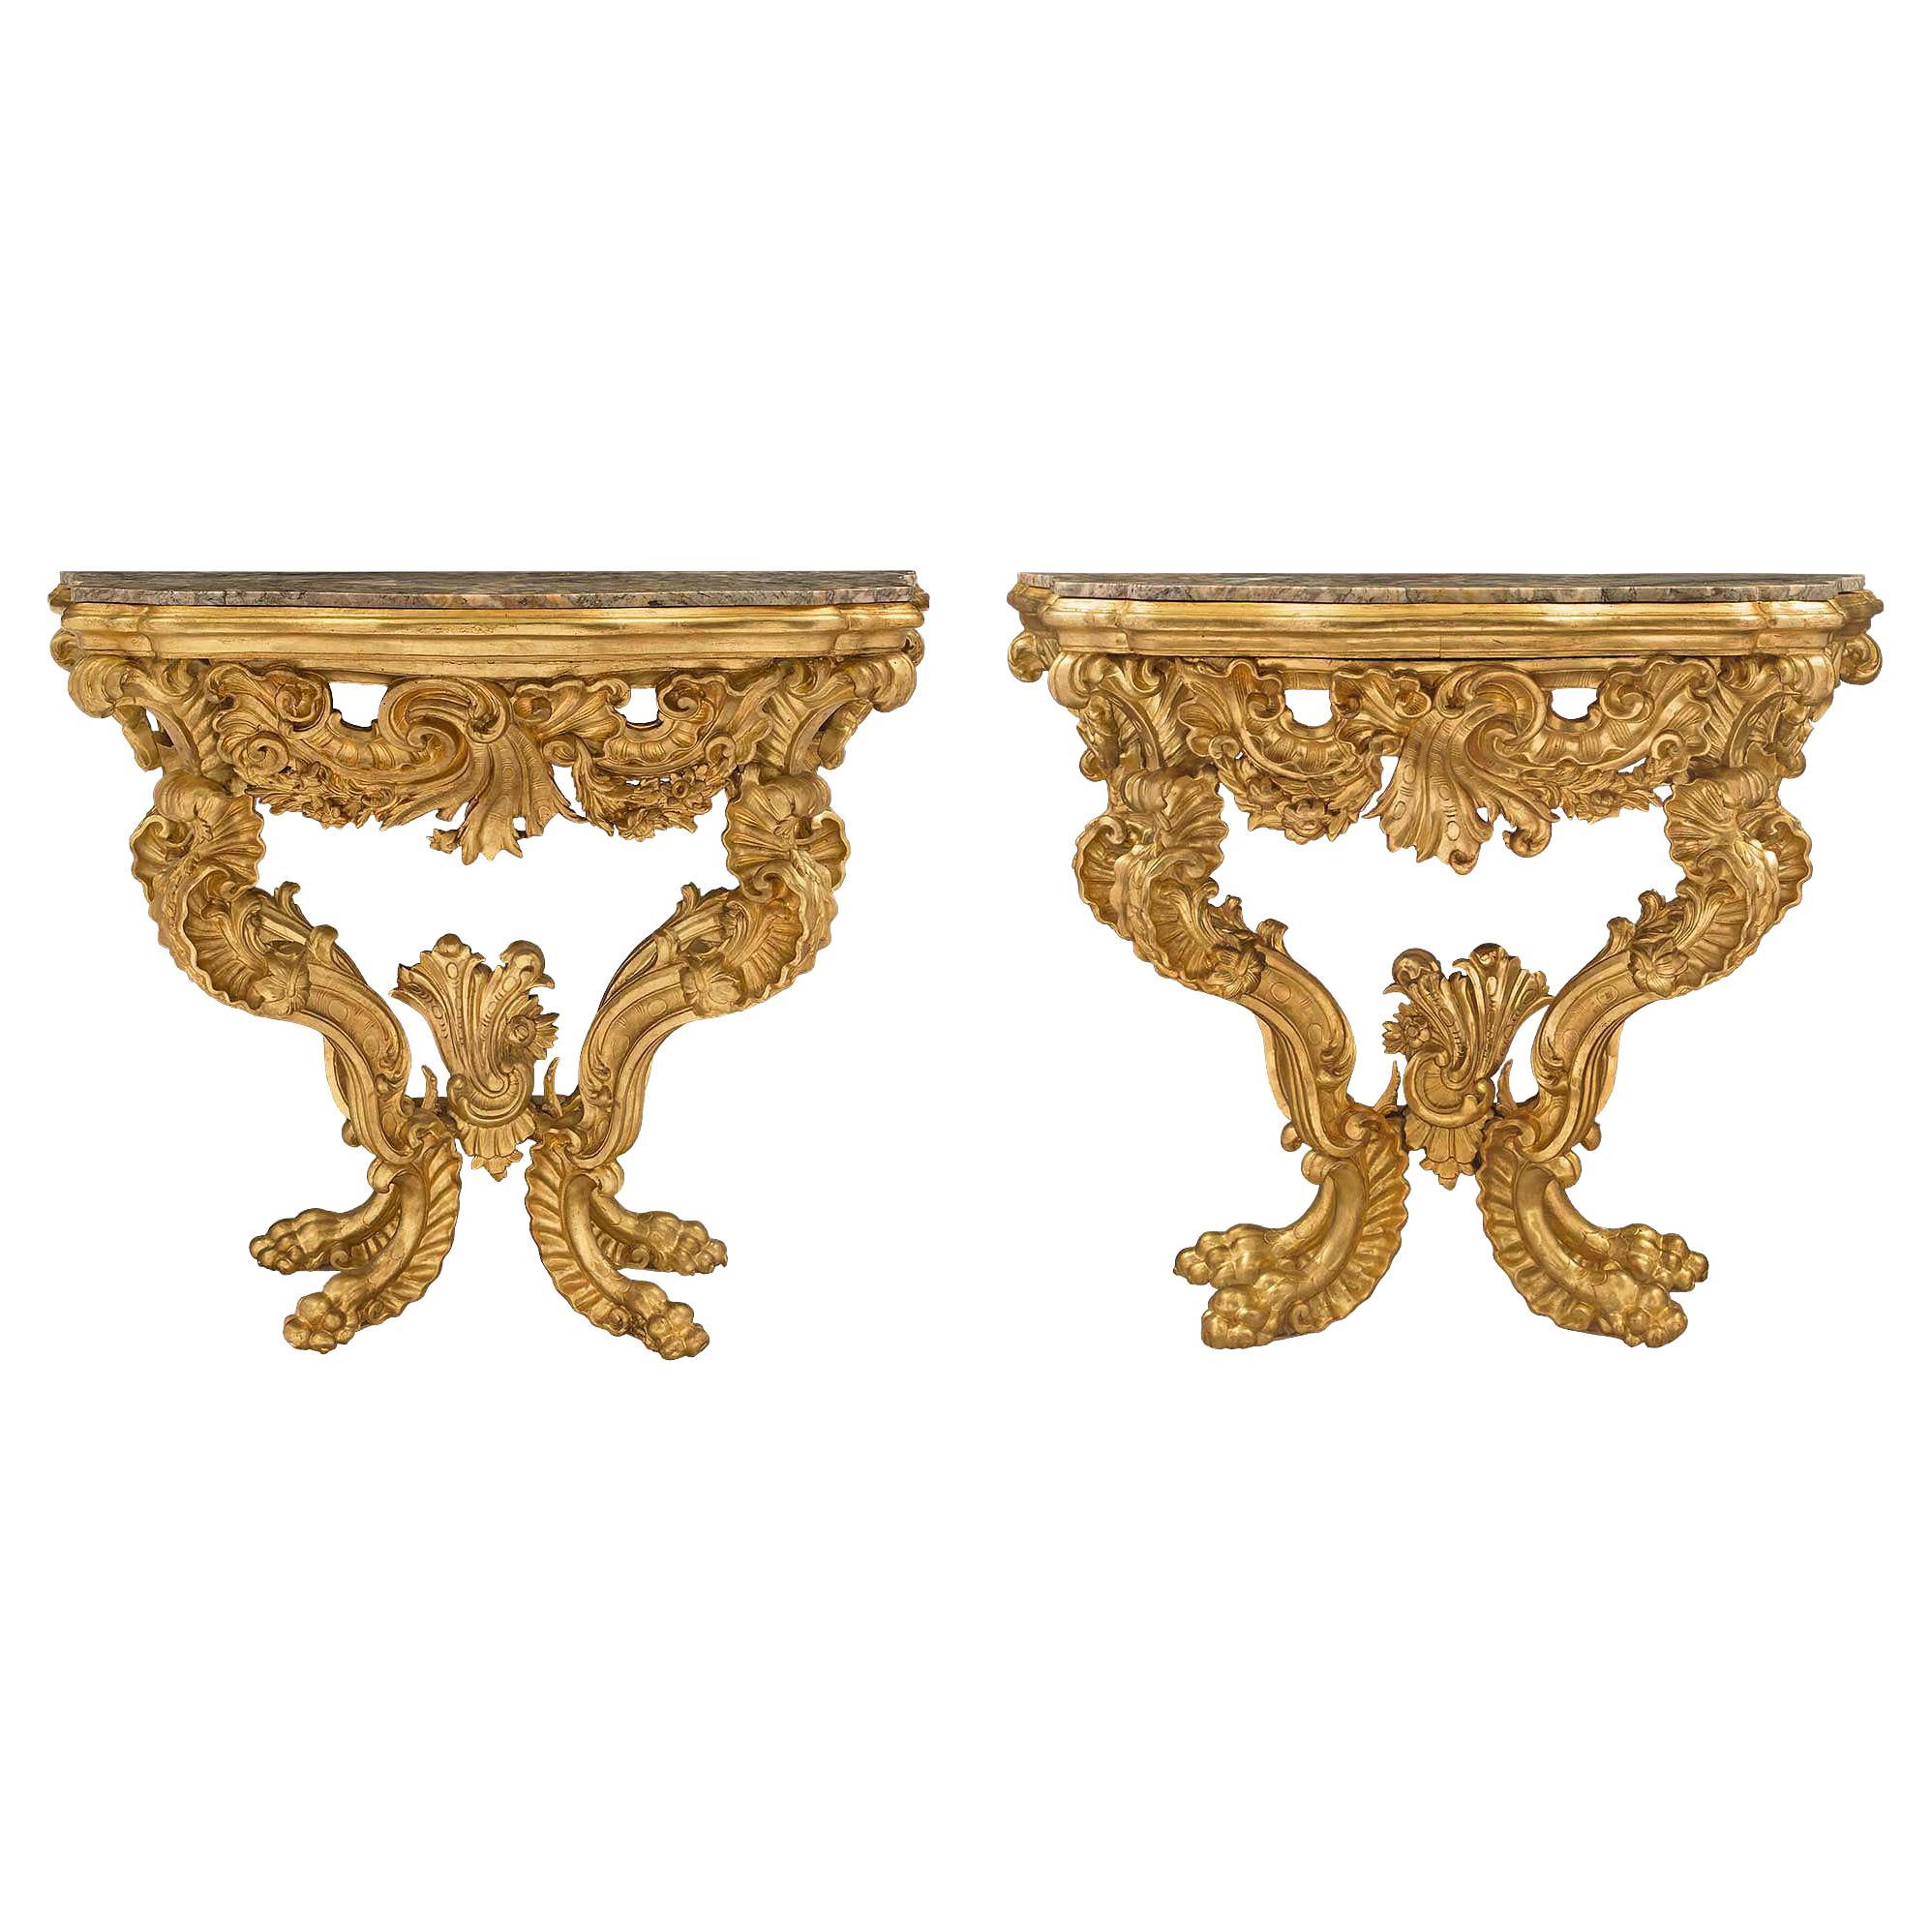 Pair of Italian 18th Century Baroque Giltwood and Marble Four Legged Consoles